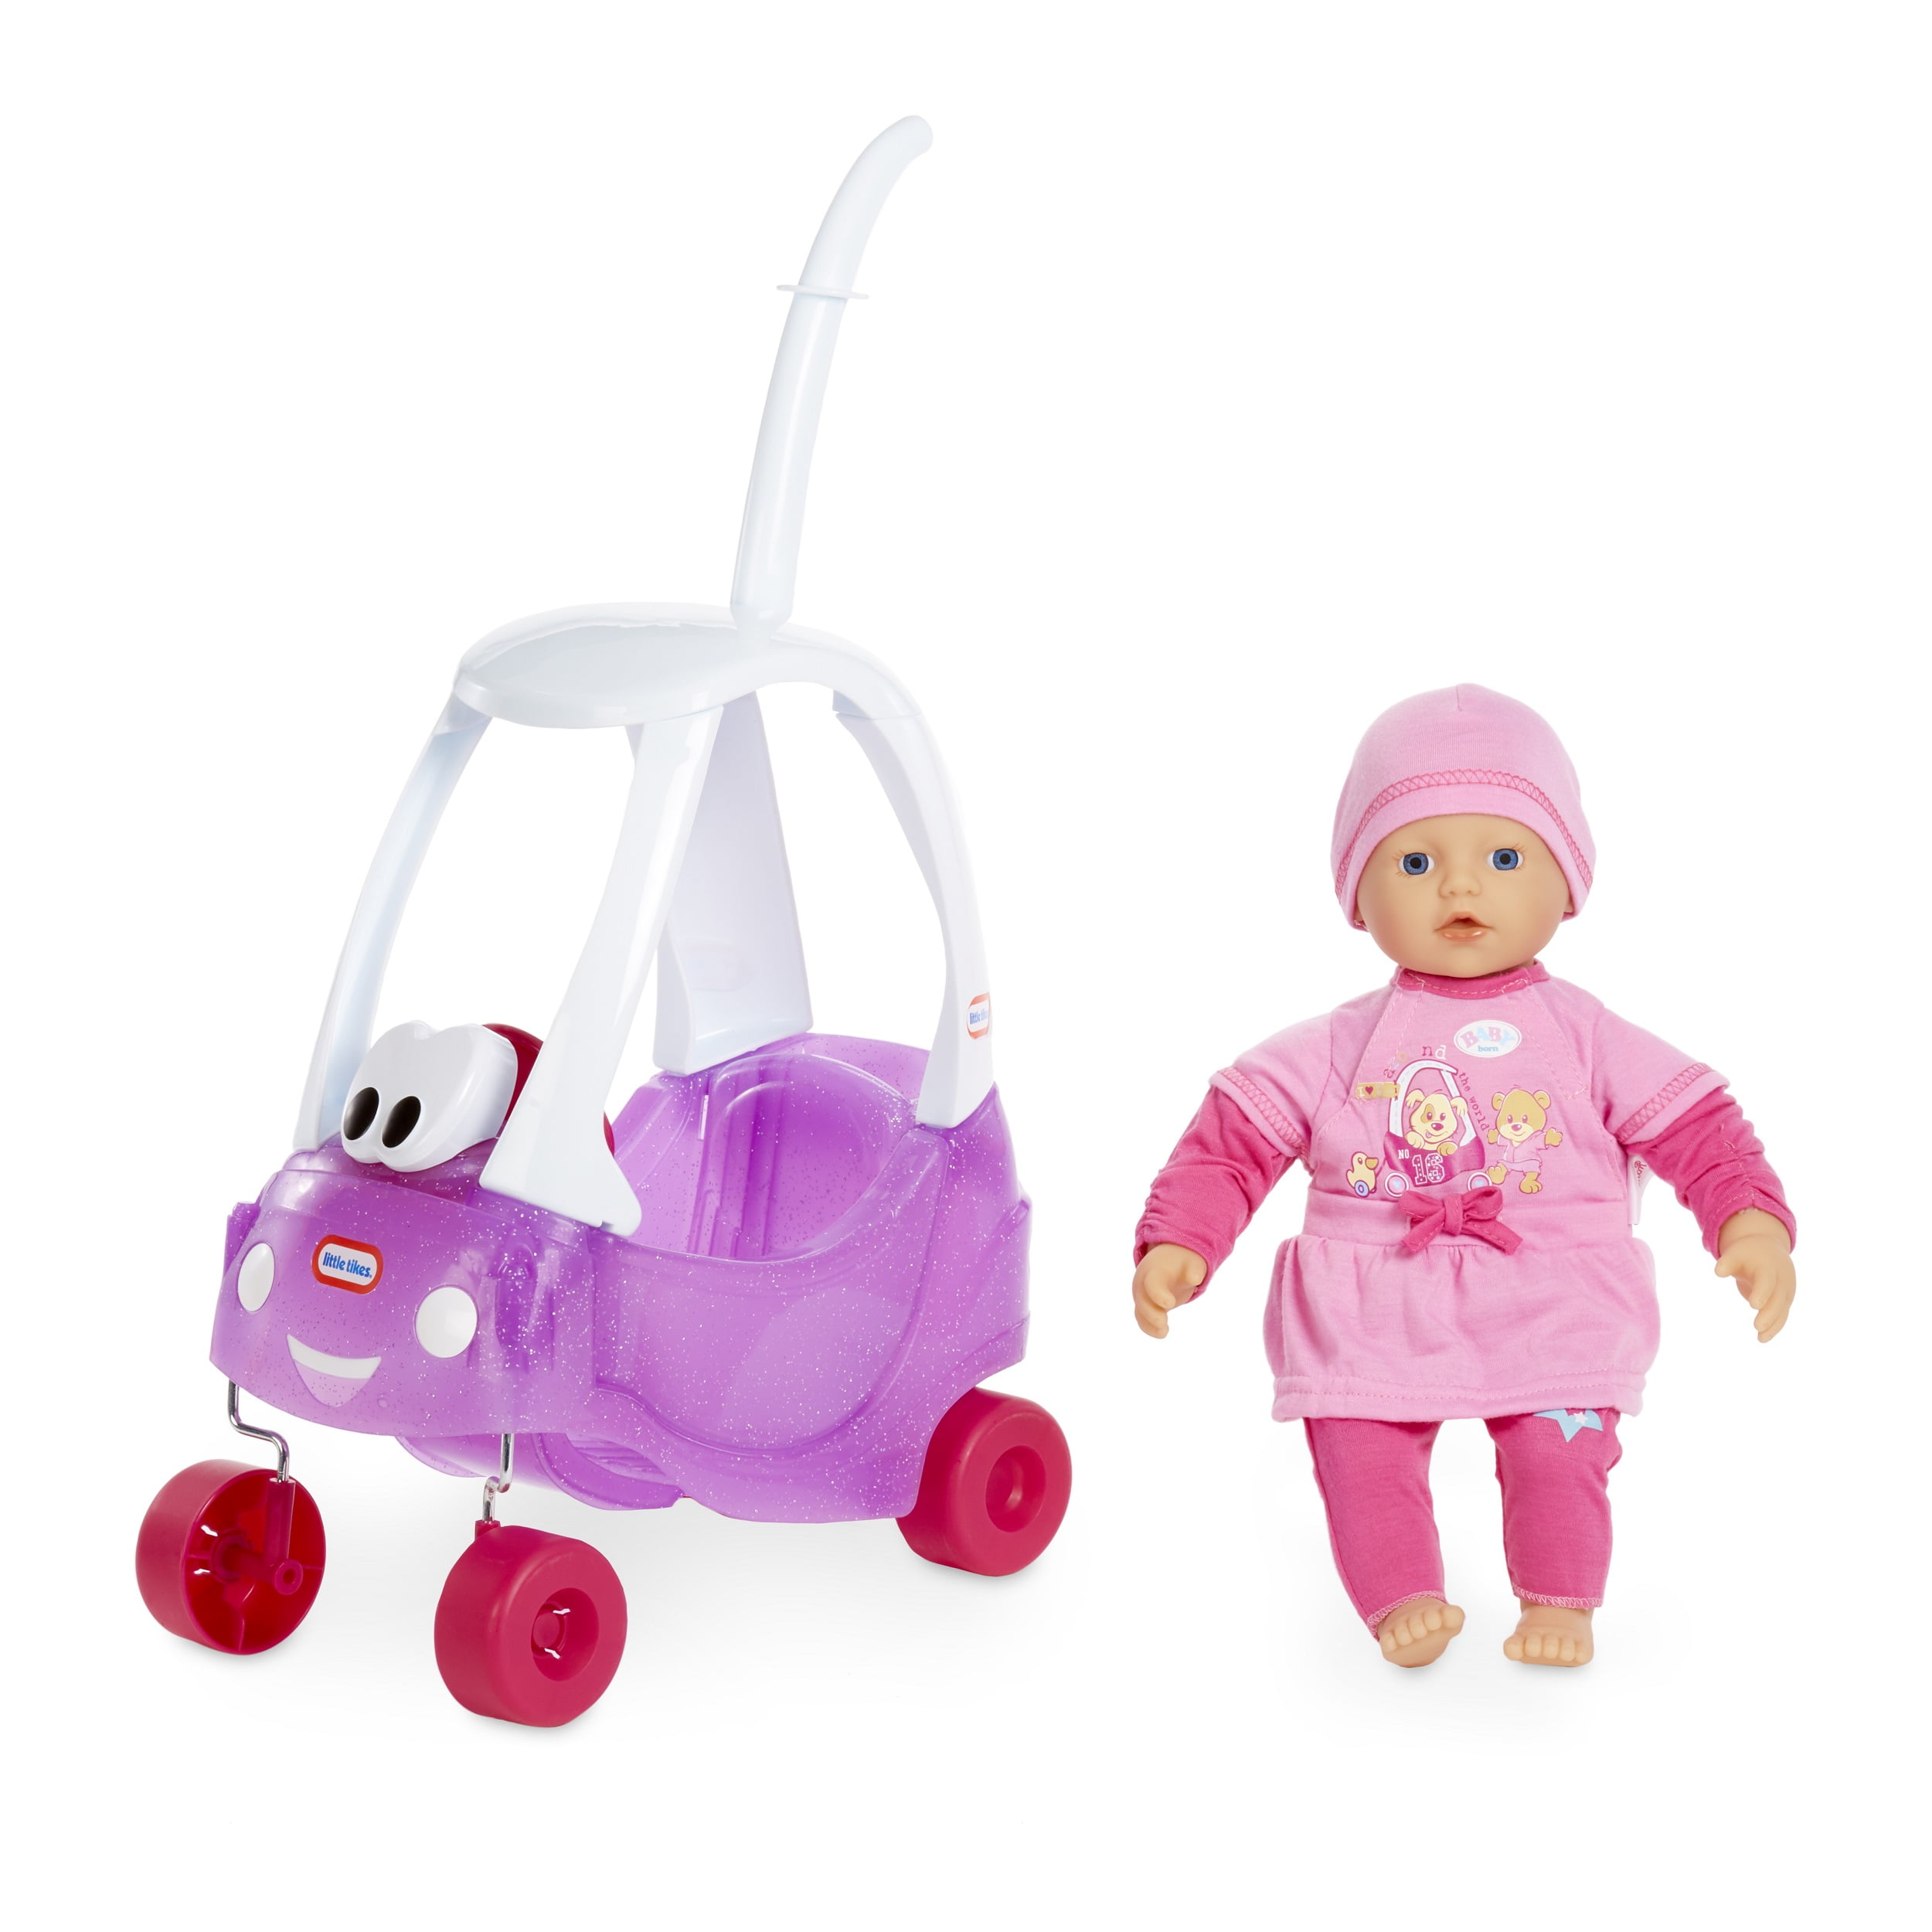 BABY born Baby's First Cozy Coupe with 